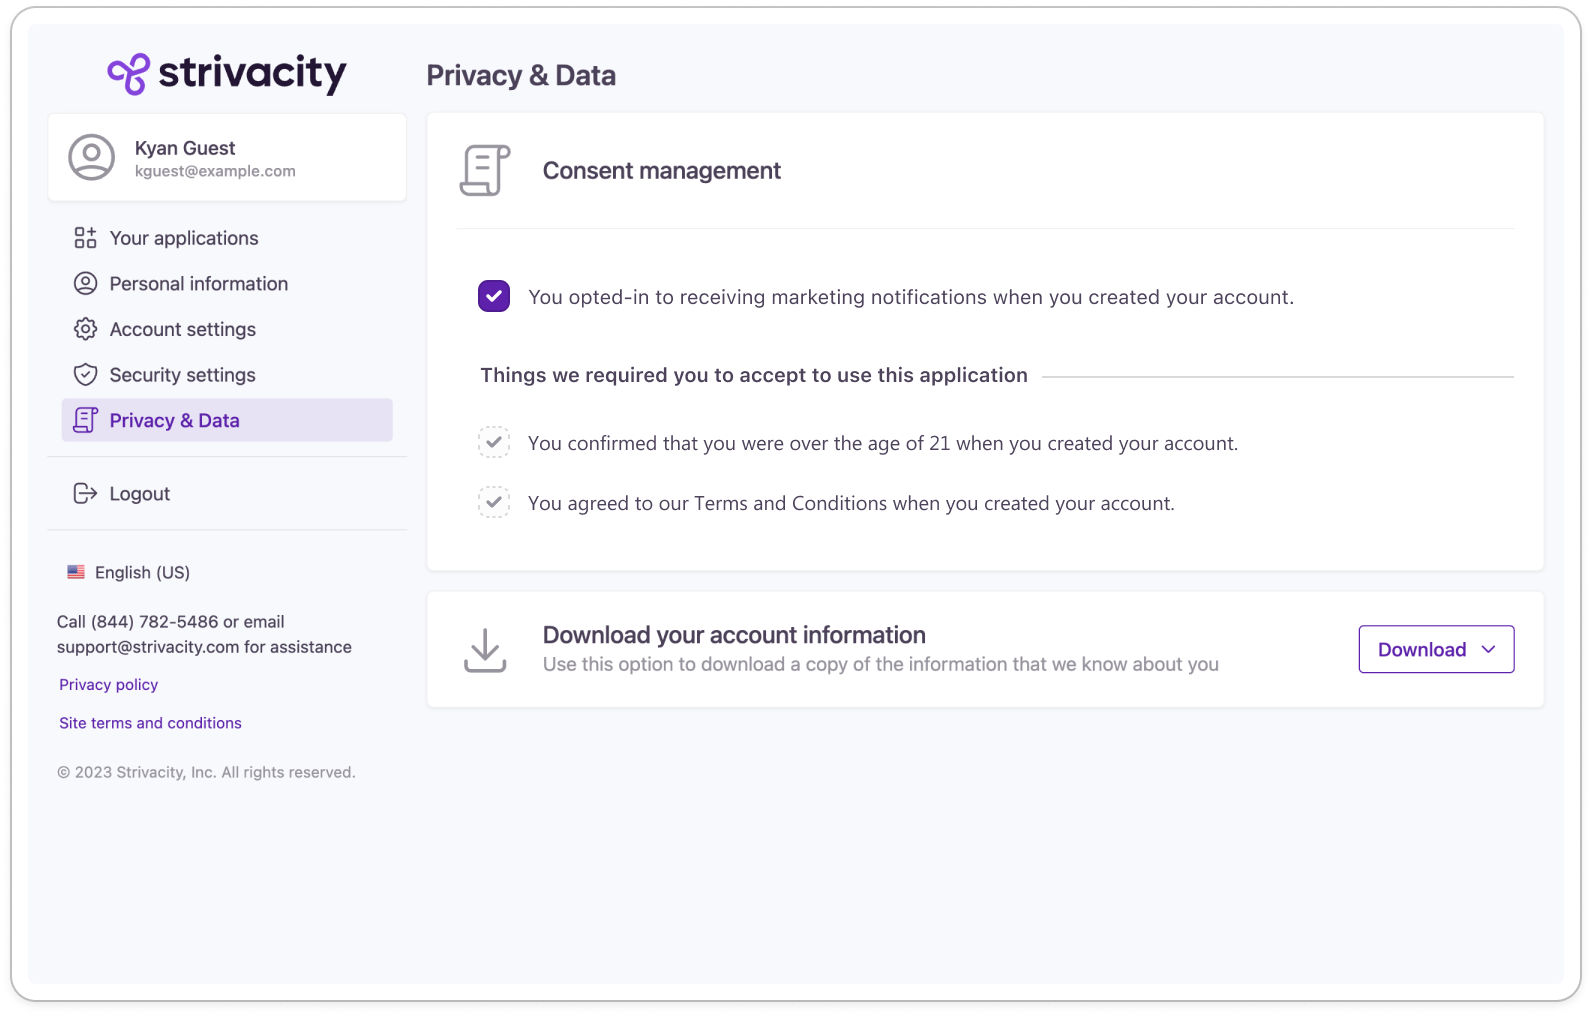 Privacy & data page